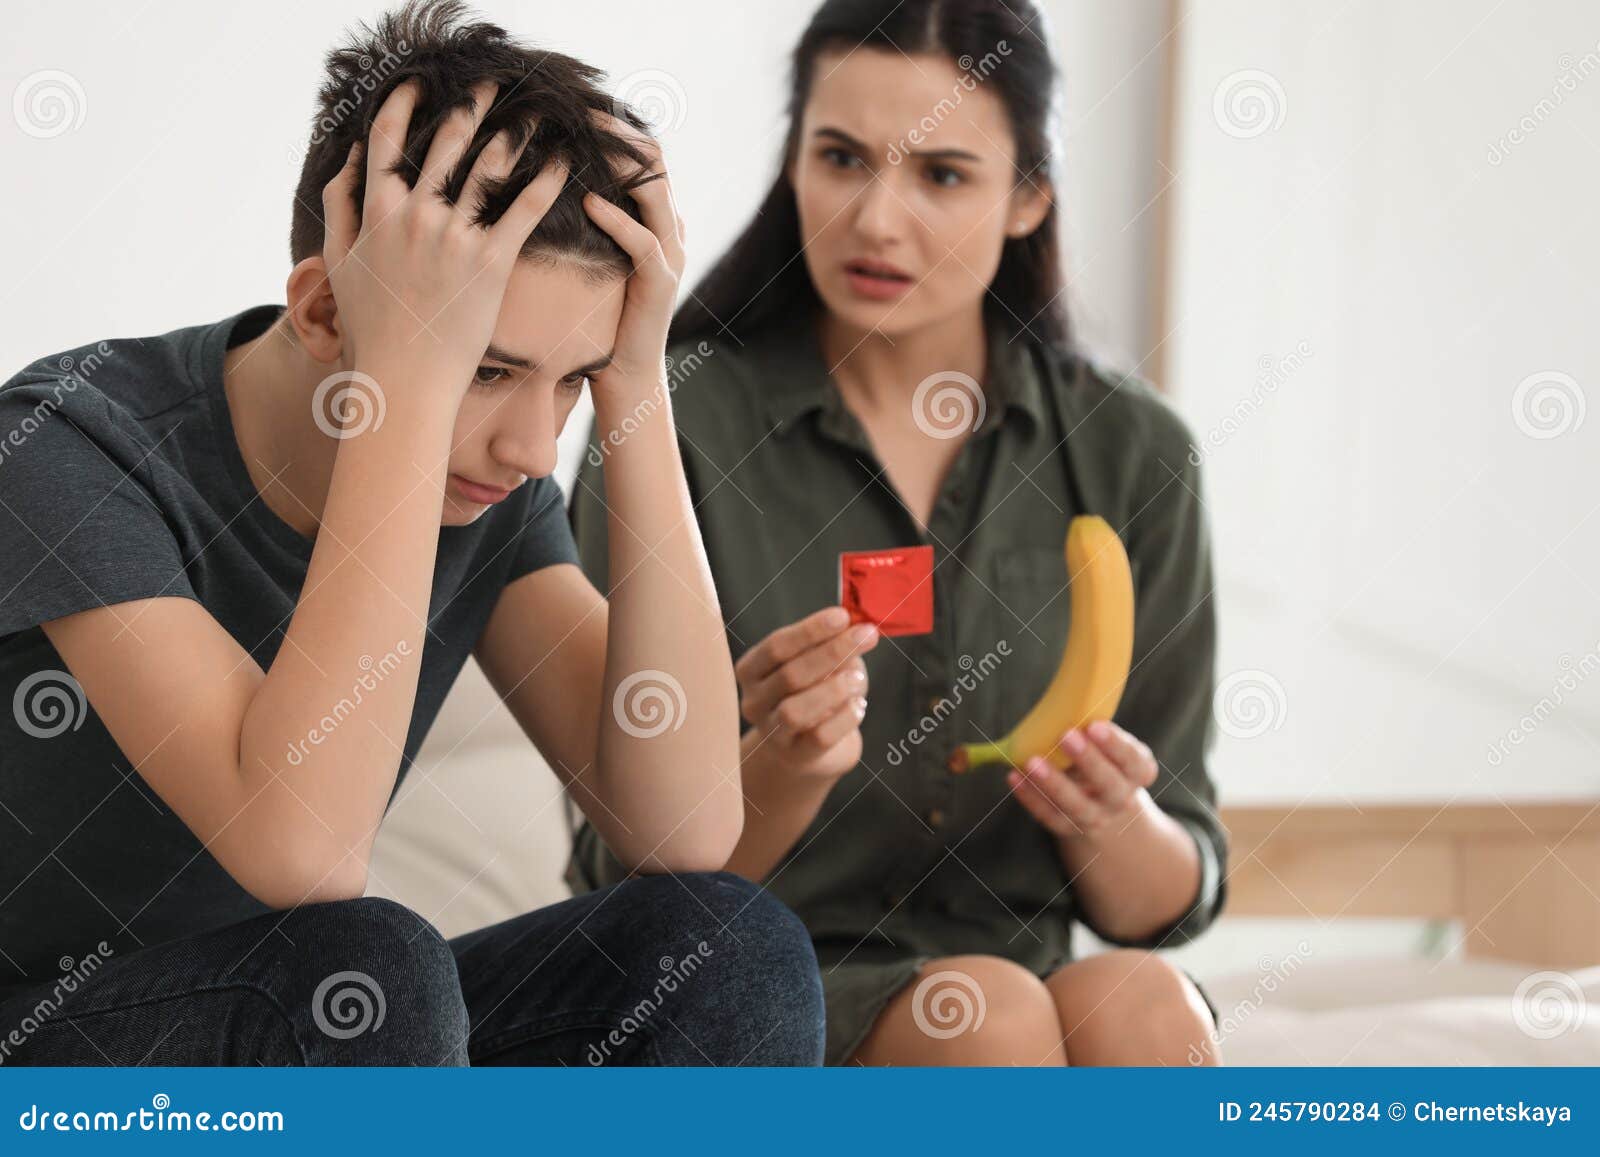 Mother Talking with Her Teenage Son about Contraception at Home